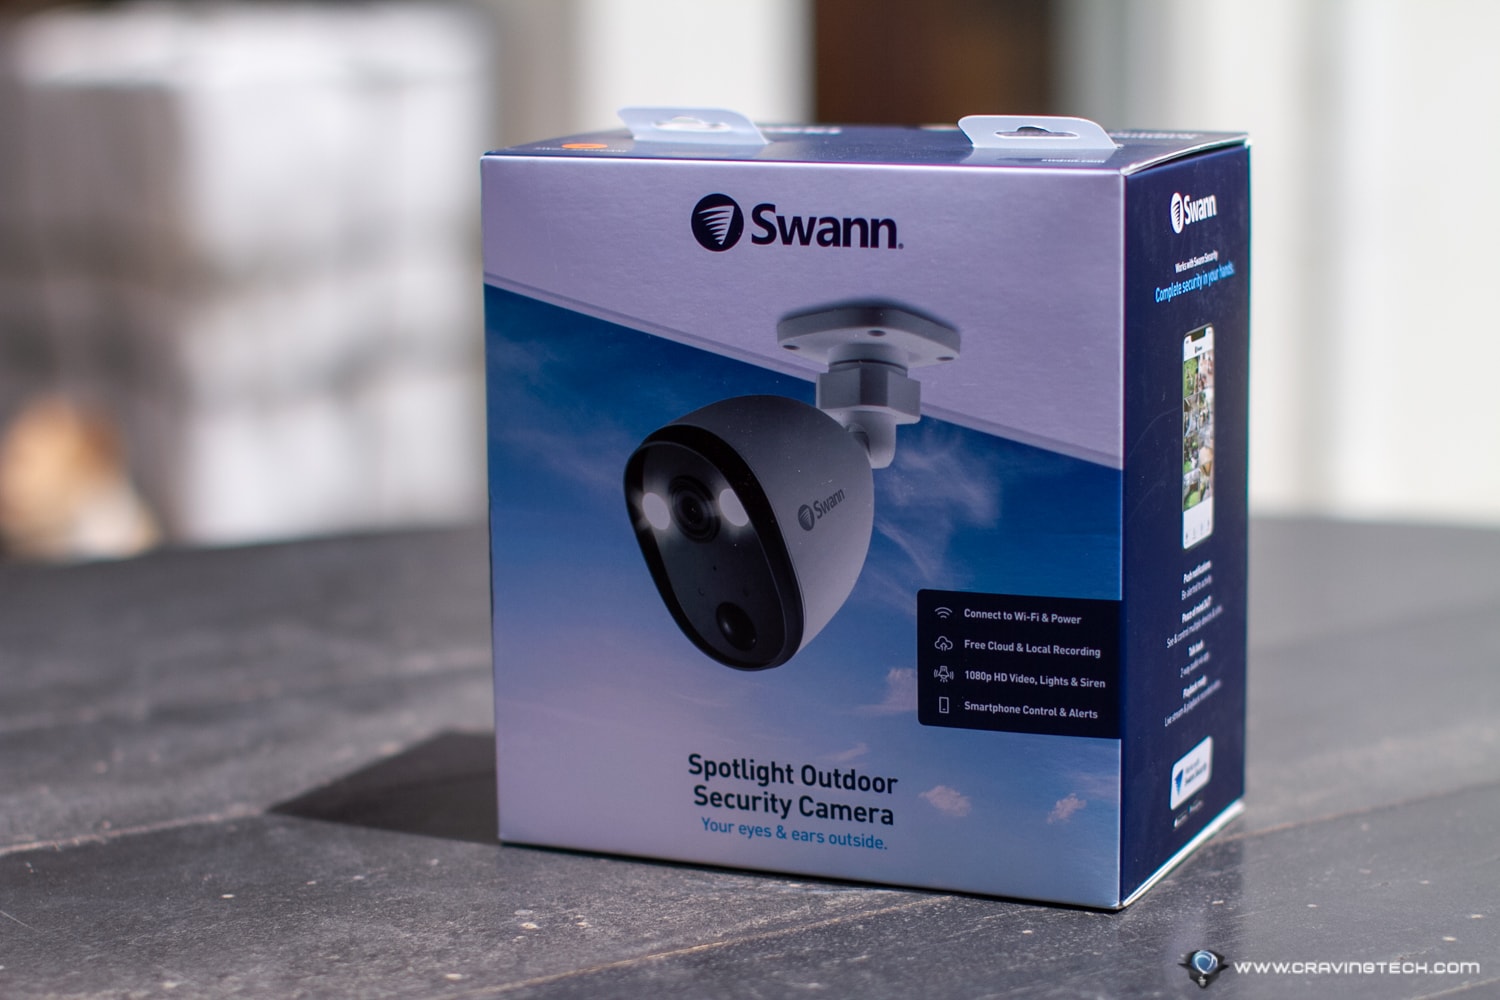 Swann Spotlight Outdoor Security Camera Review